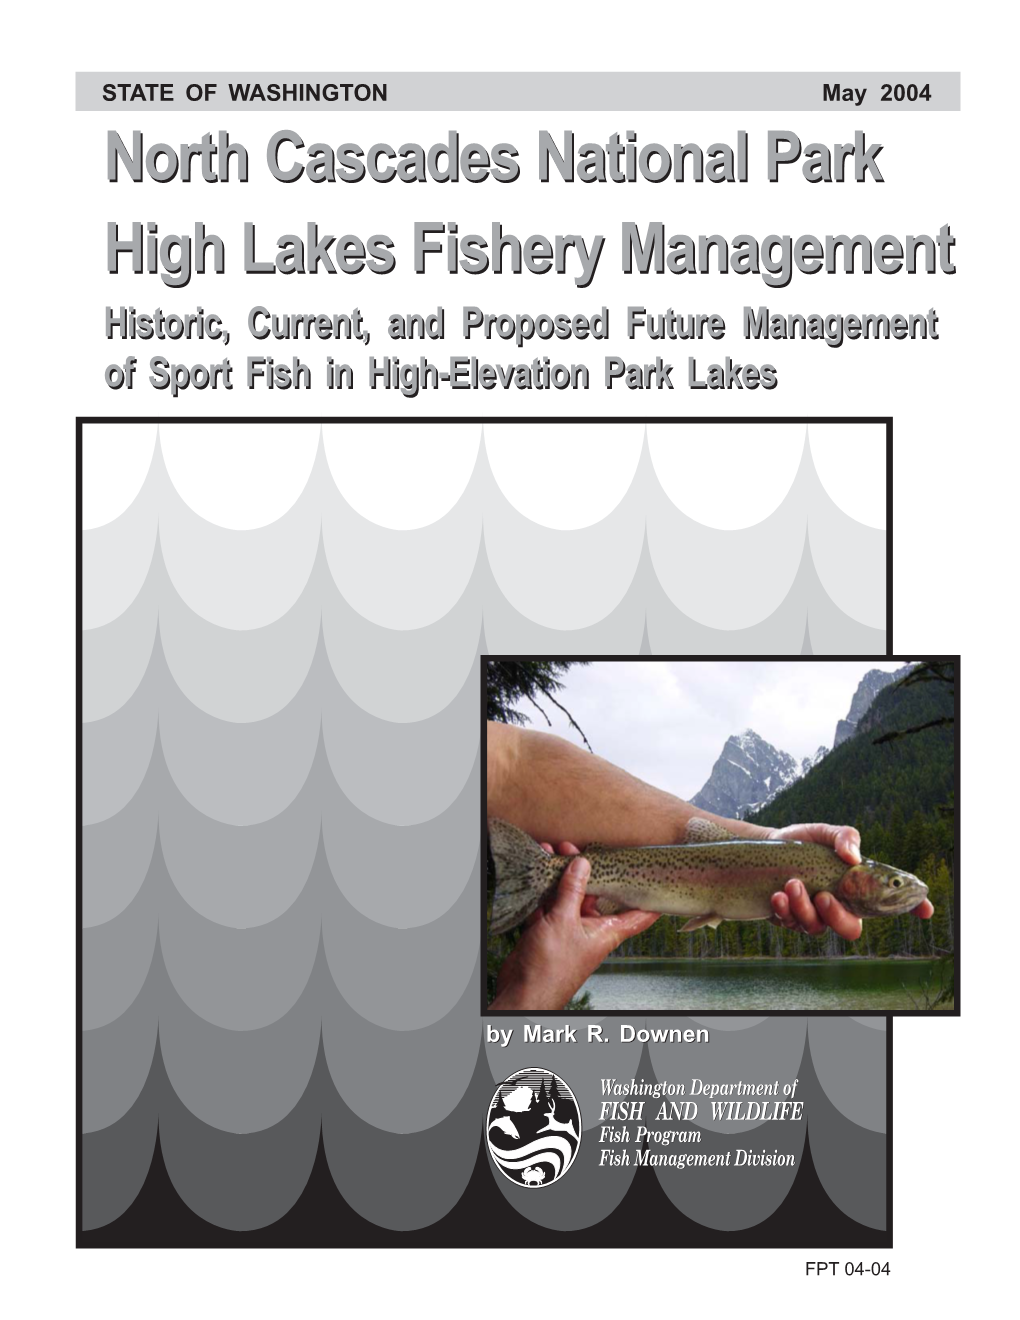 North Cascades National Park High Lakes Fishery Management